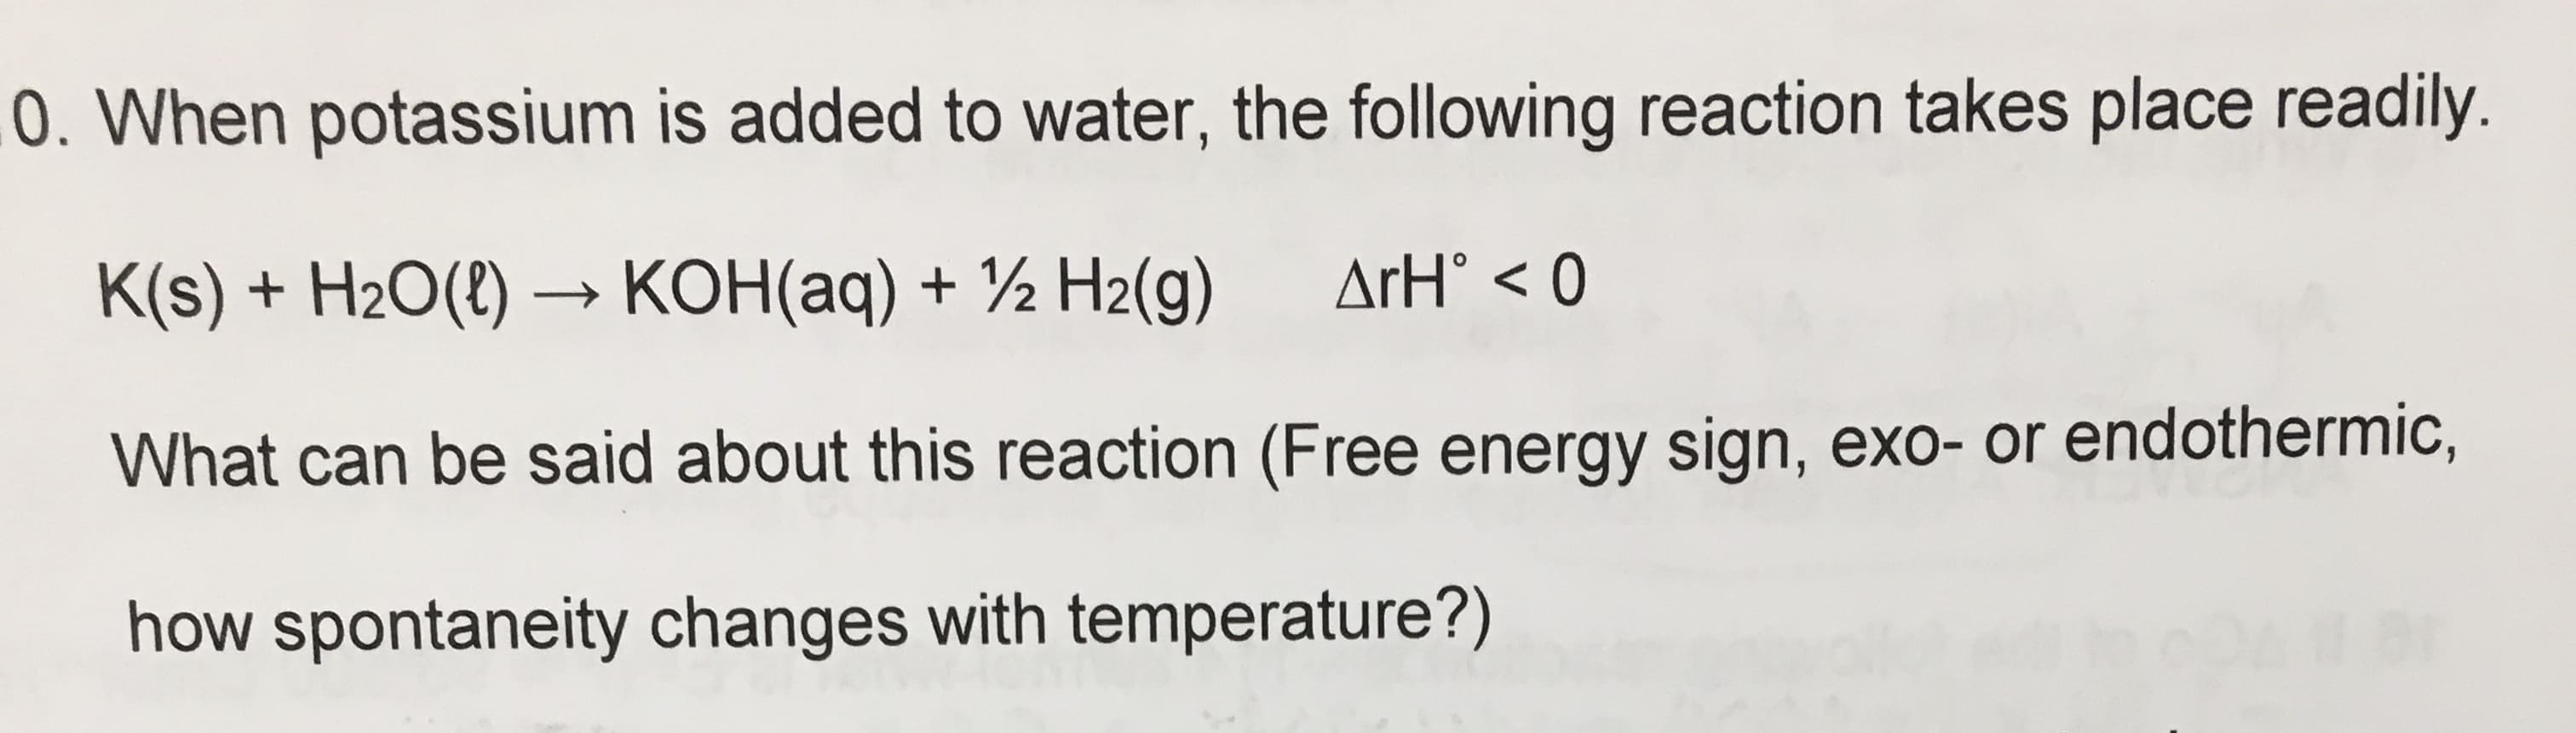 0. When potassium is added to water, the following reaction takes place readily.
ArH° < 0
K(s) + H2O(8) –→ KOH(aq) + ½ H2(g)
What can be said about this reaction (Free energy sign, exo- or endothermic,
how spontaneity changes with temperature?)
